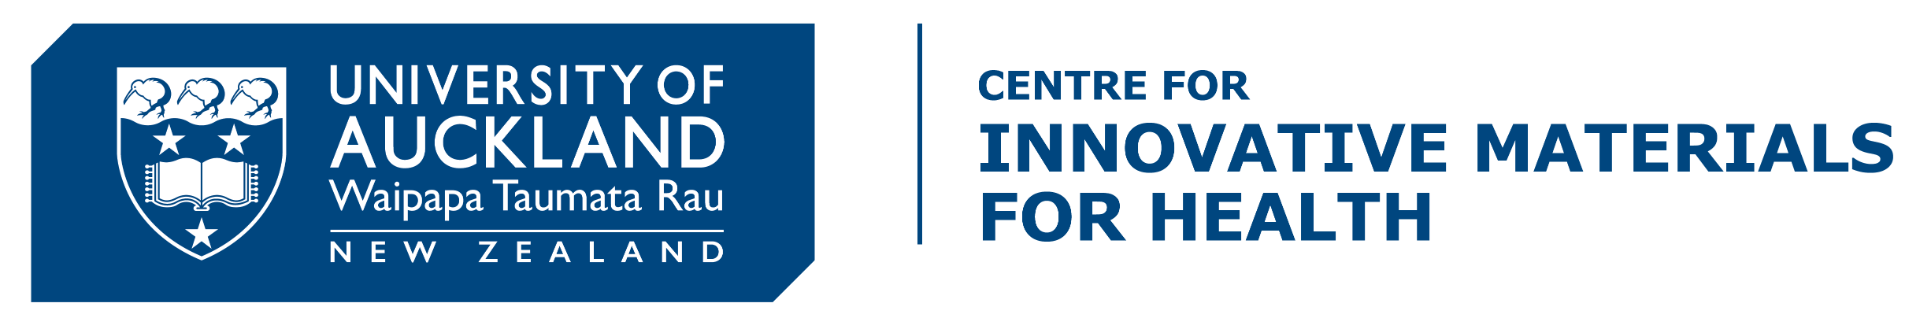 Centre for Innovative Materials for Health